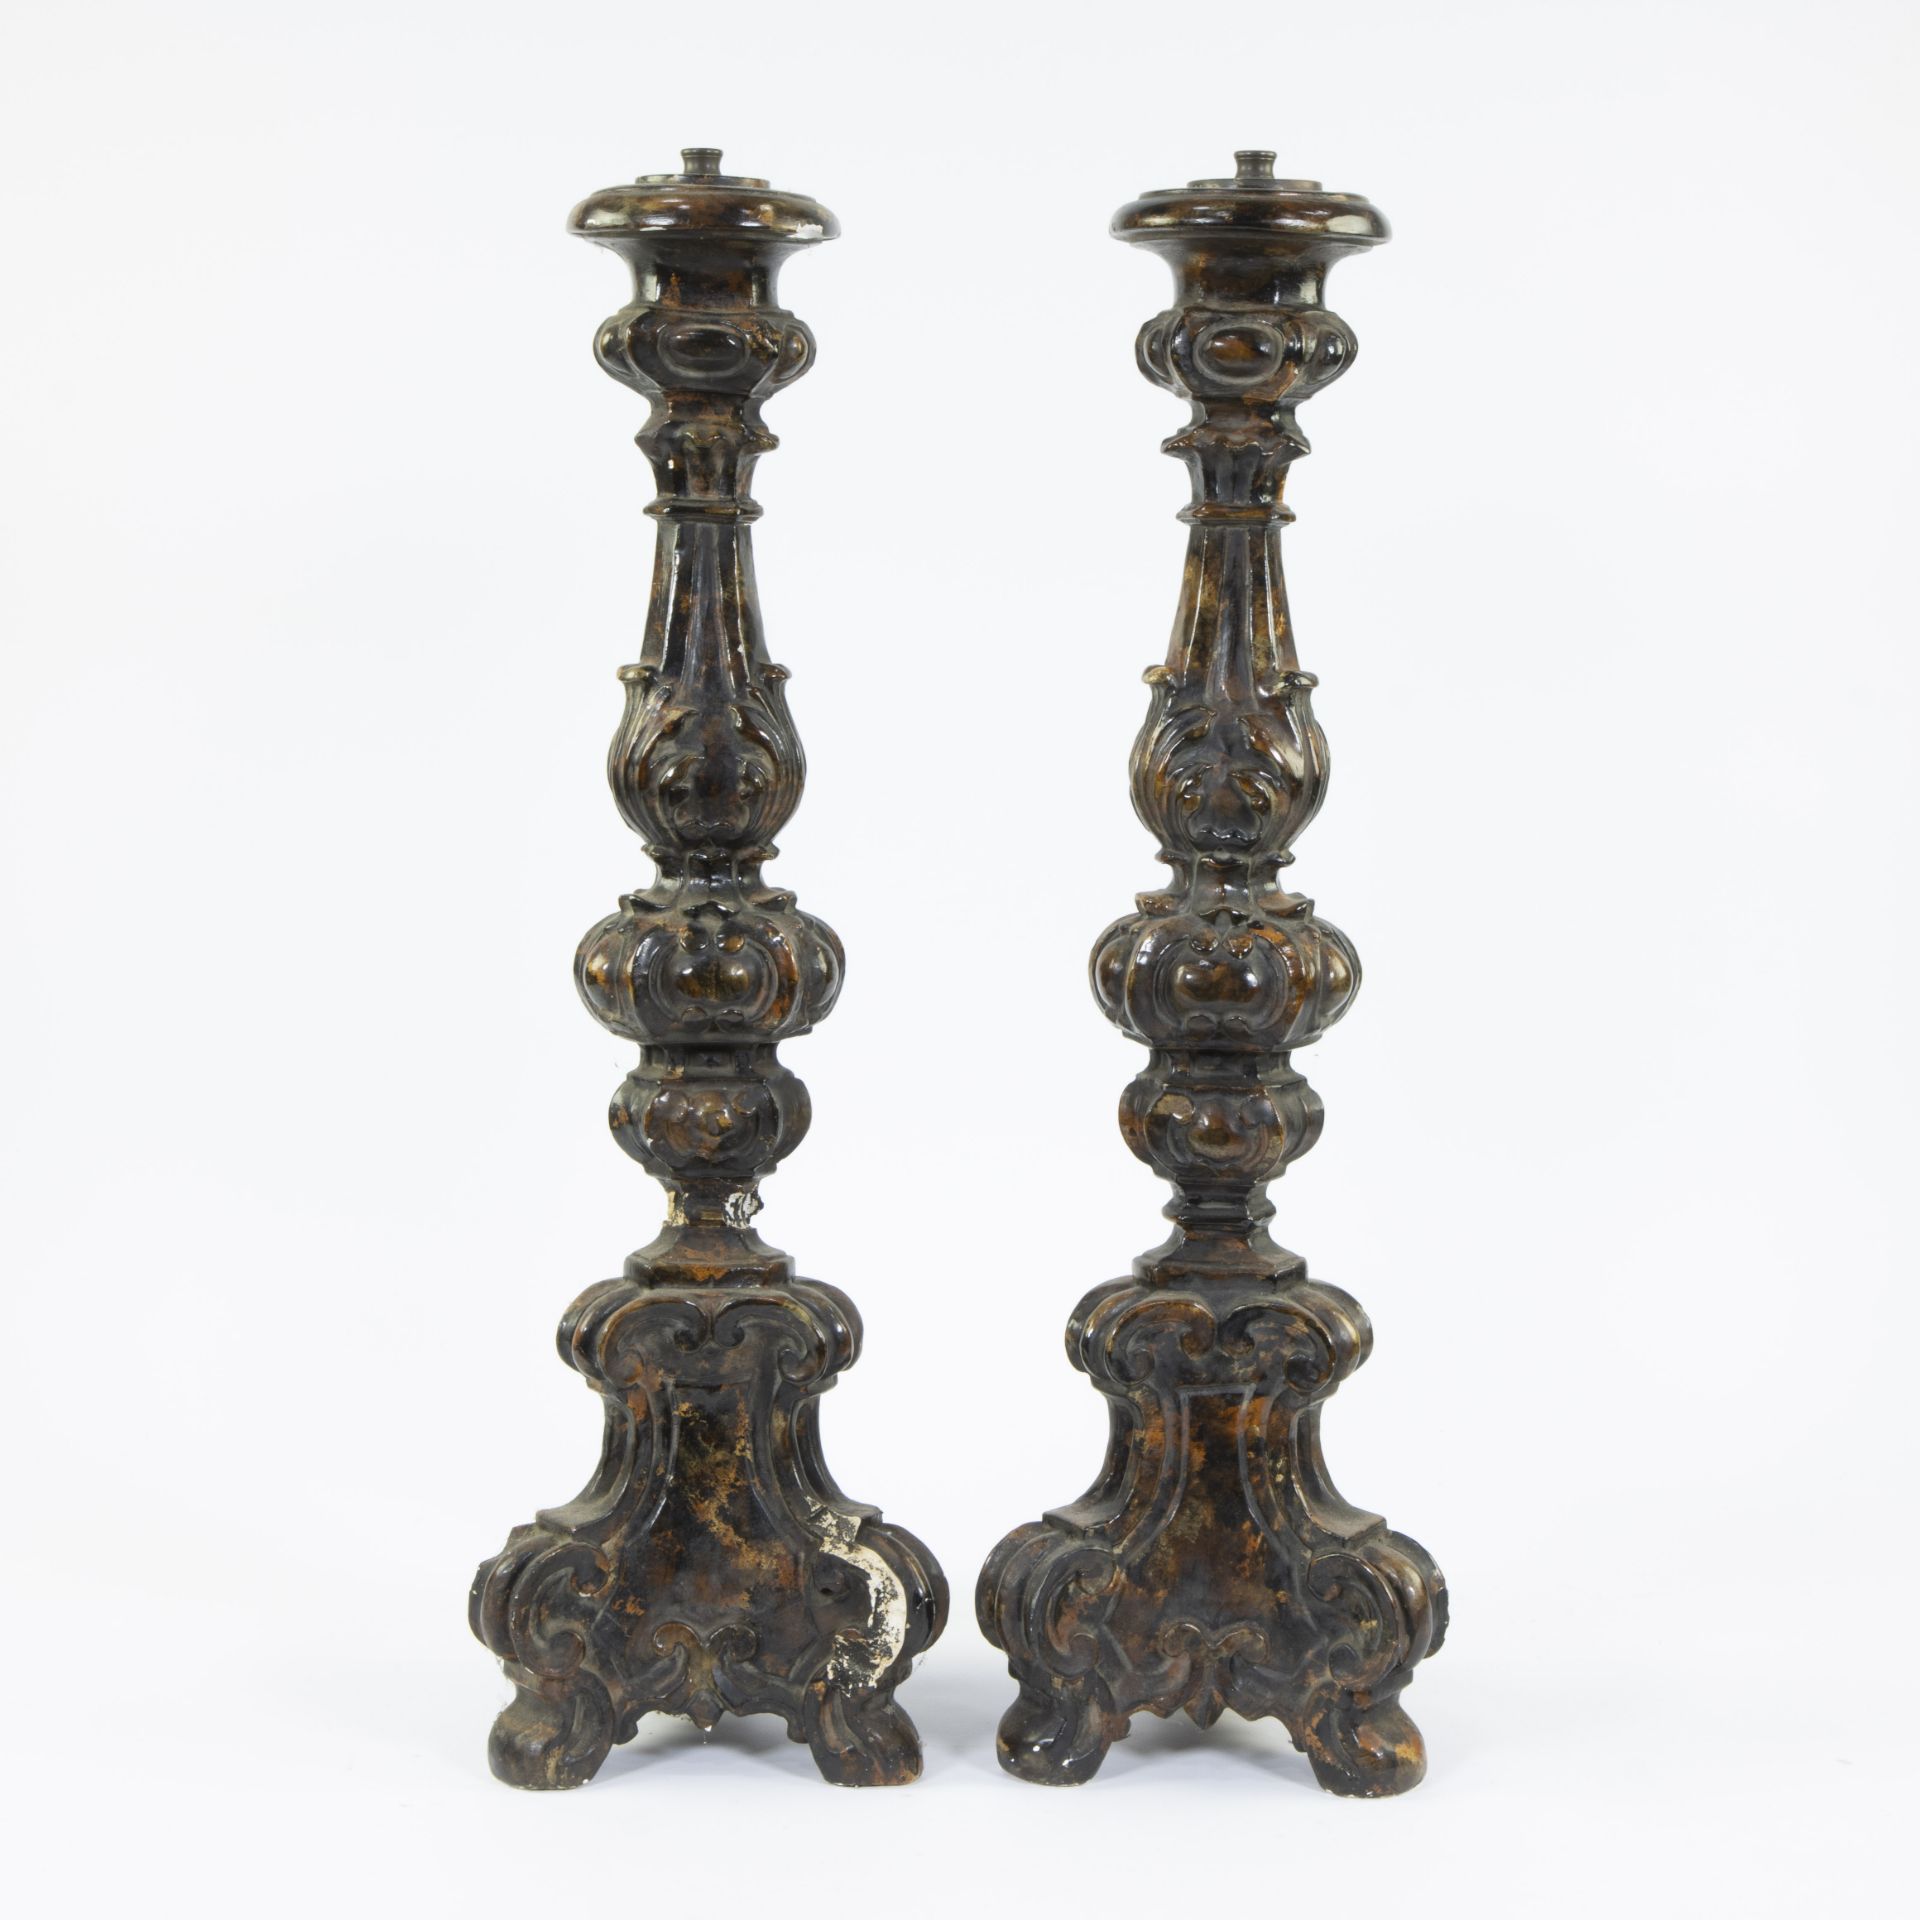 Wooden candlesticks 18th century with traces of polychromy converted to lampadaire - Image 4 of 4